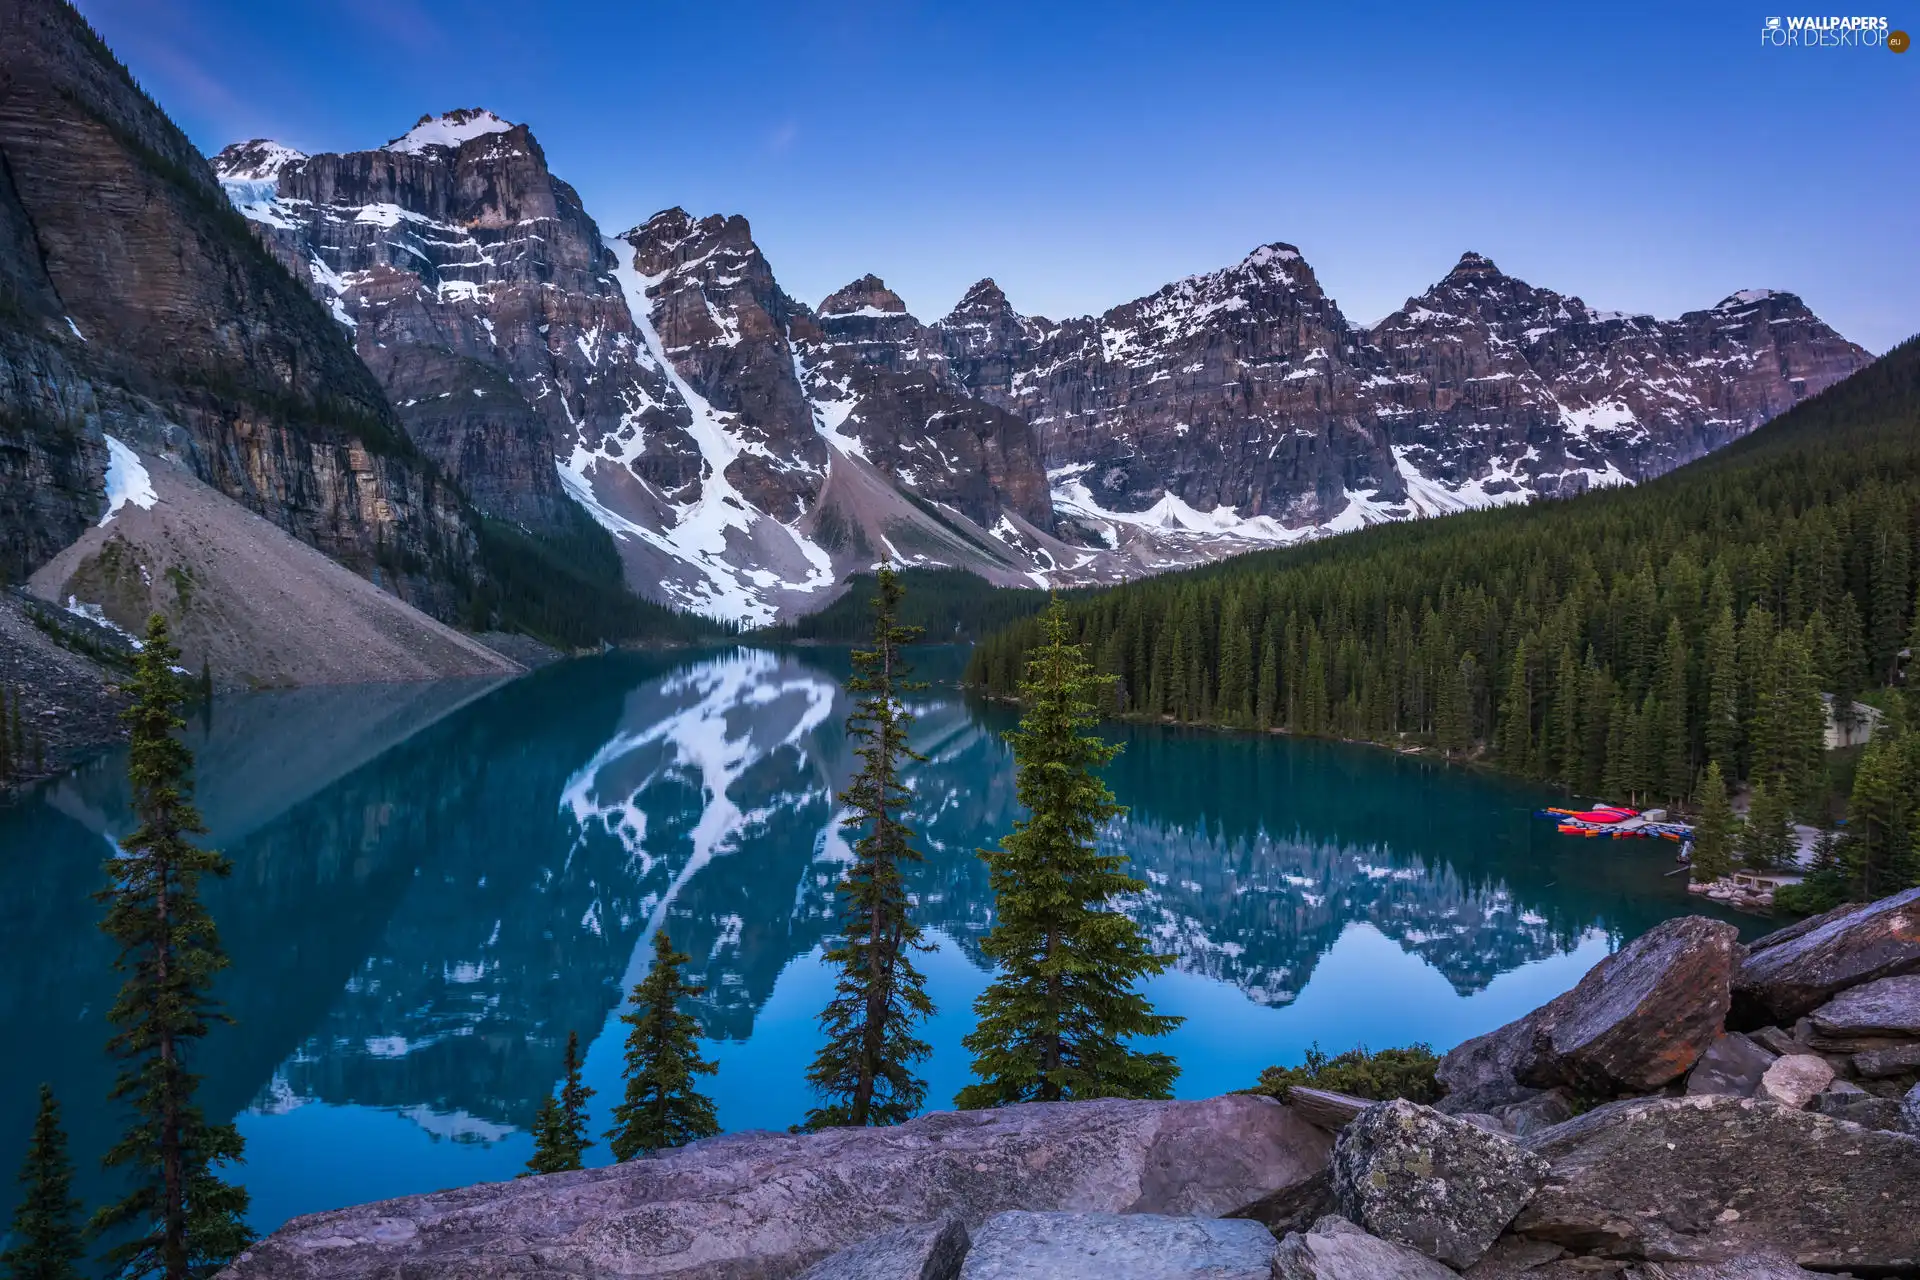 viewes, Province of Alberta, Moraine Lake, clouds, Mountains, Banff National Park, lake, Canada, Stones, trees